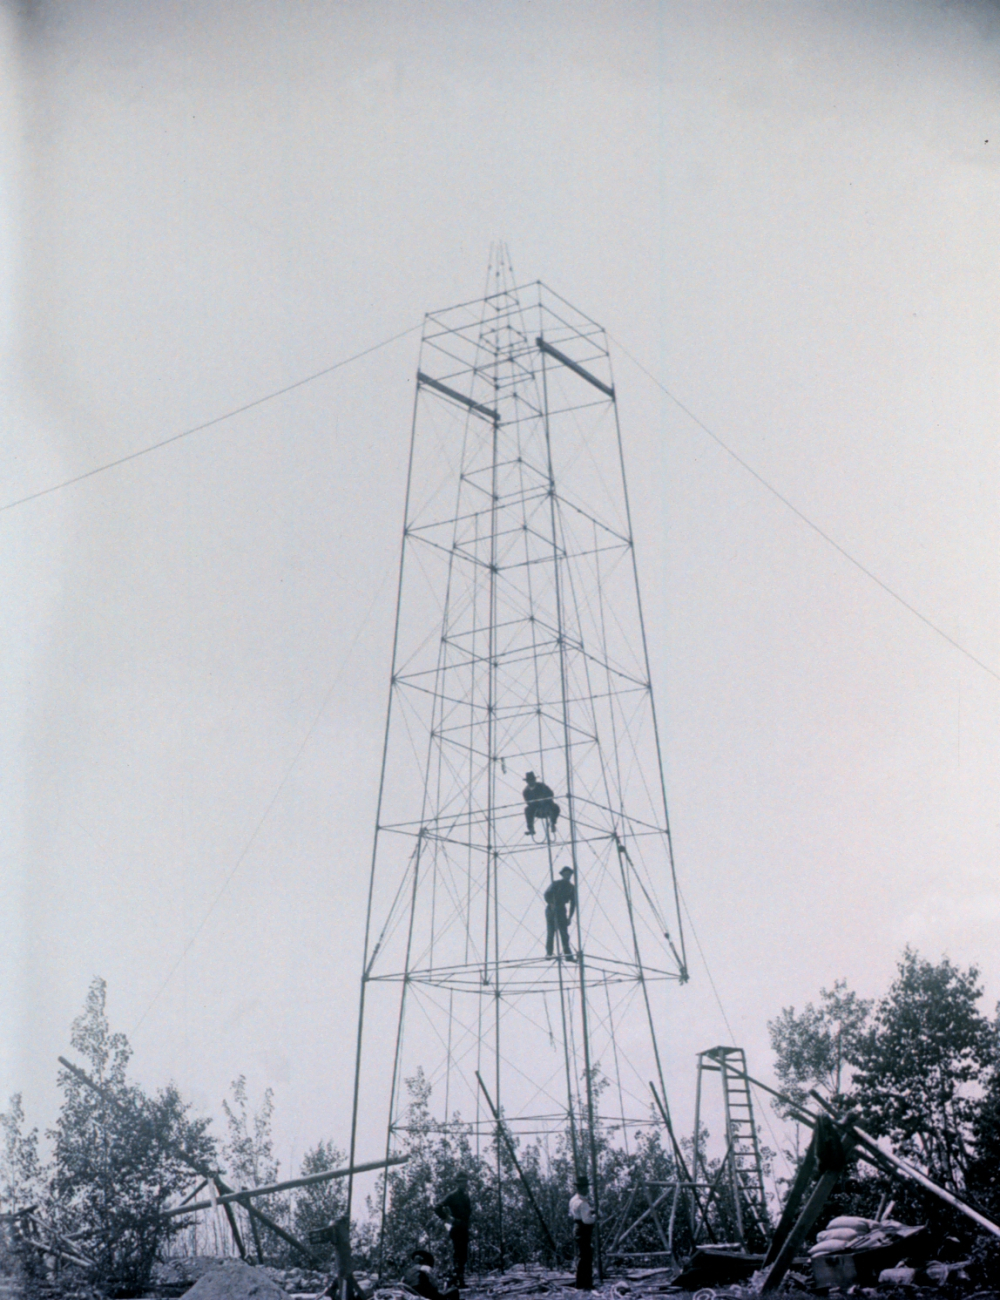 Gas pipe triangulation tower similar to Bilby tower